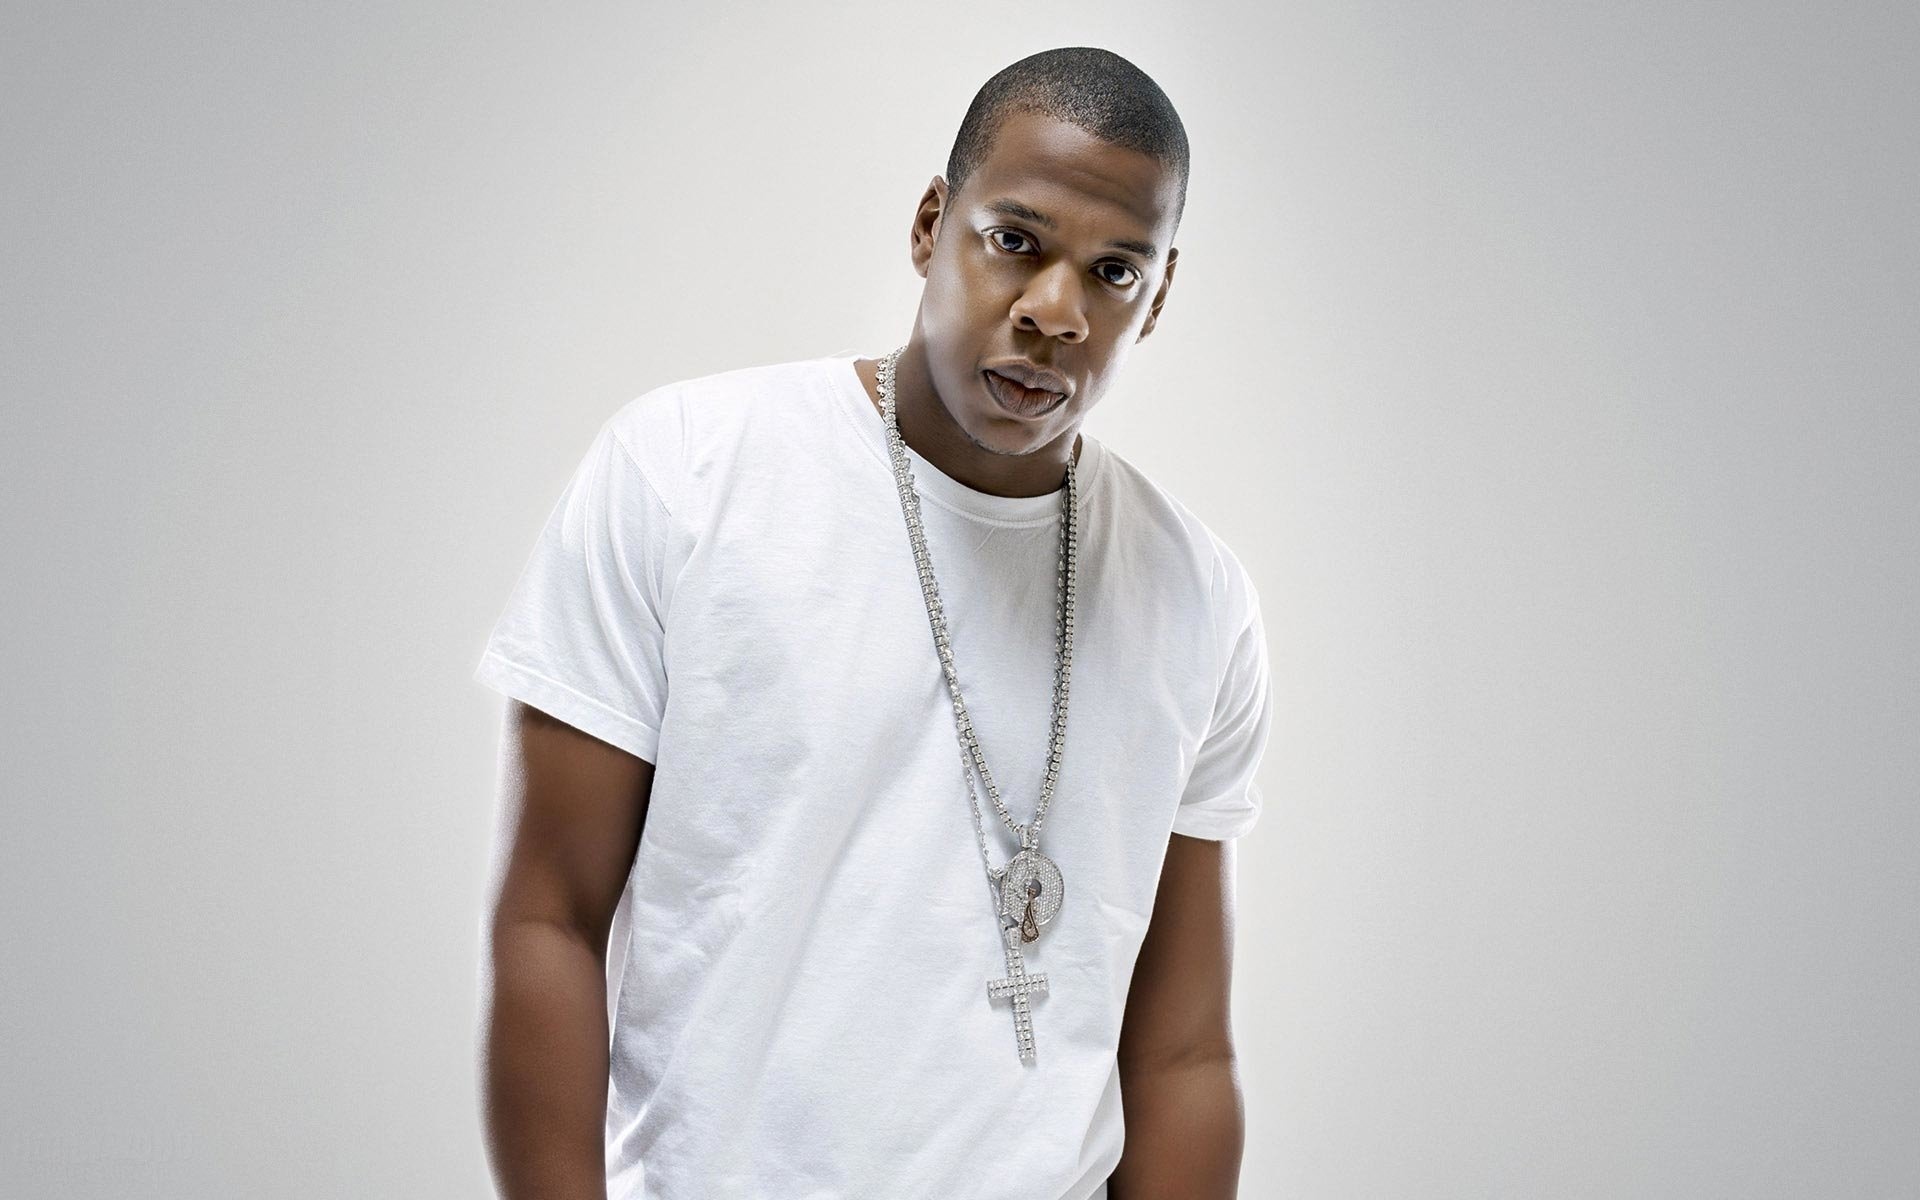 Jay-Z: Began his musical career in the late 1980s, Co-founded the record label Roc-A-Fella Records in 1995. 1920x1200 HD Wallpaper.